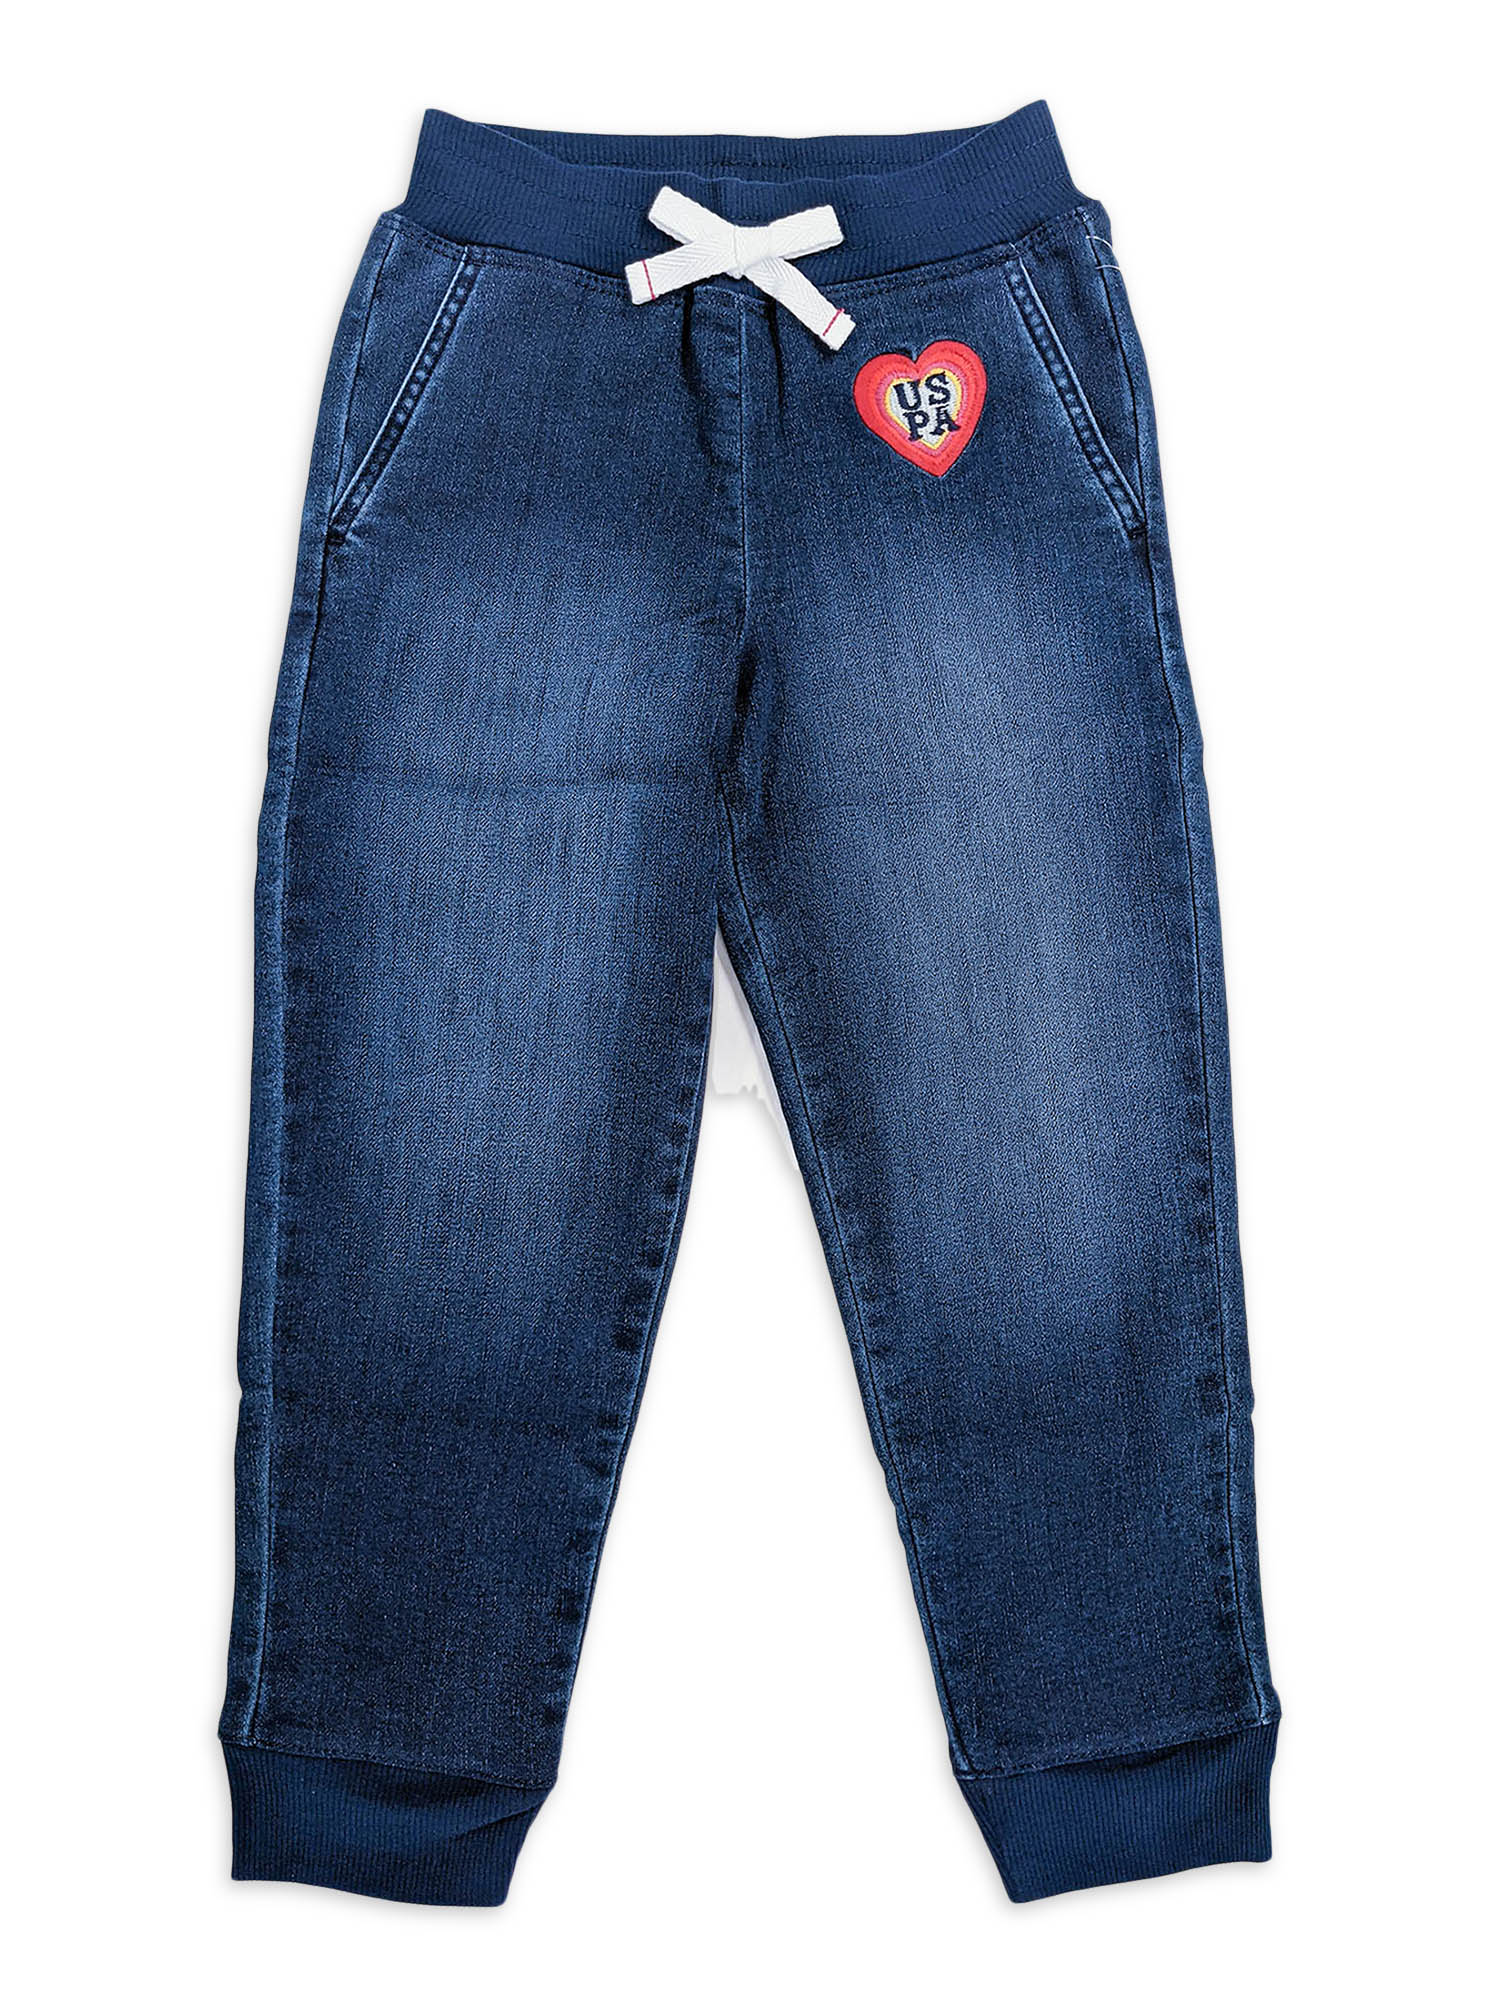 U.S. Polo Assn. Girls Embroidered Denim Joggers, Sizes 4-18 - image 1 of 2